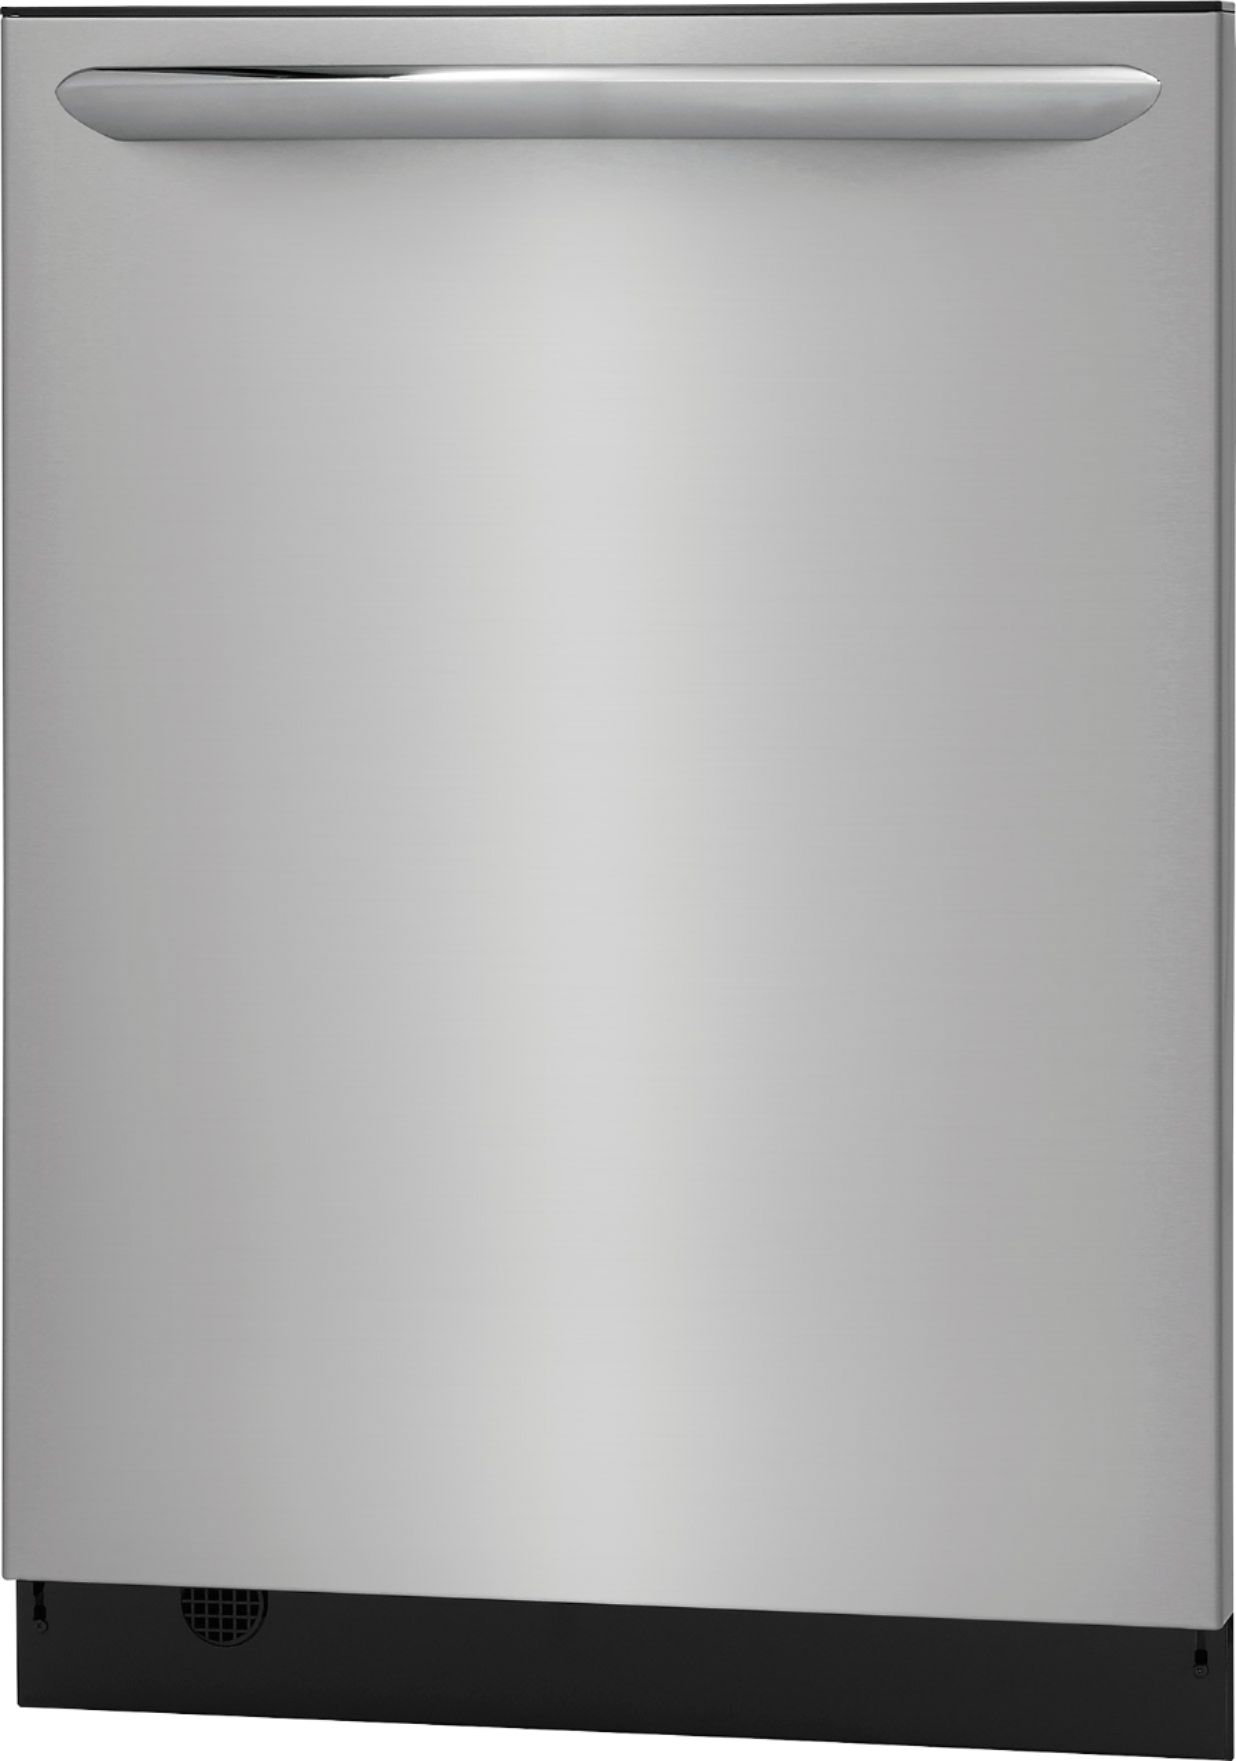 Left View: Whirlpool - 24" Built-In Dishwasher - White